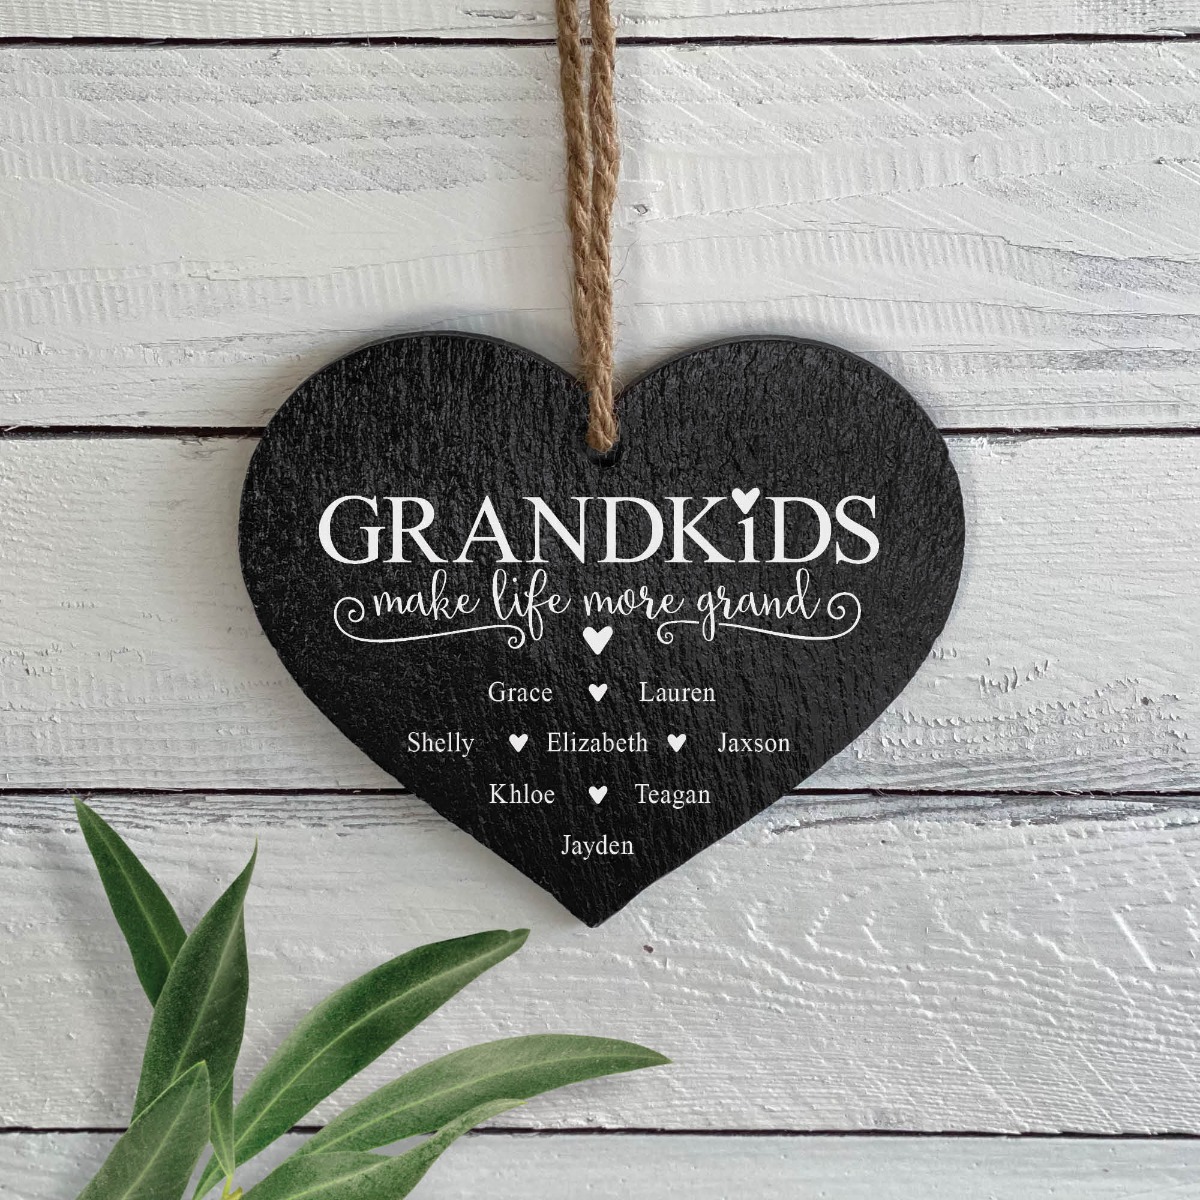 Grandkids hanging heart slate with names 